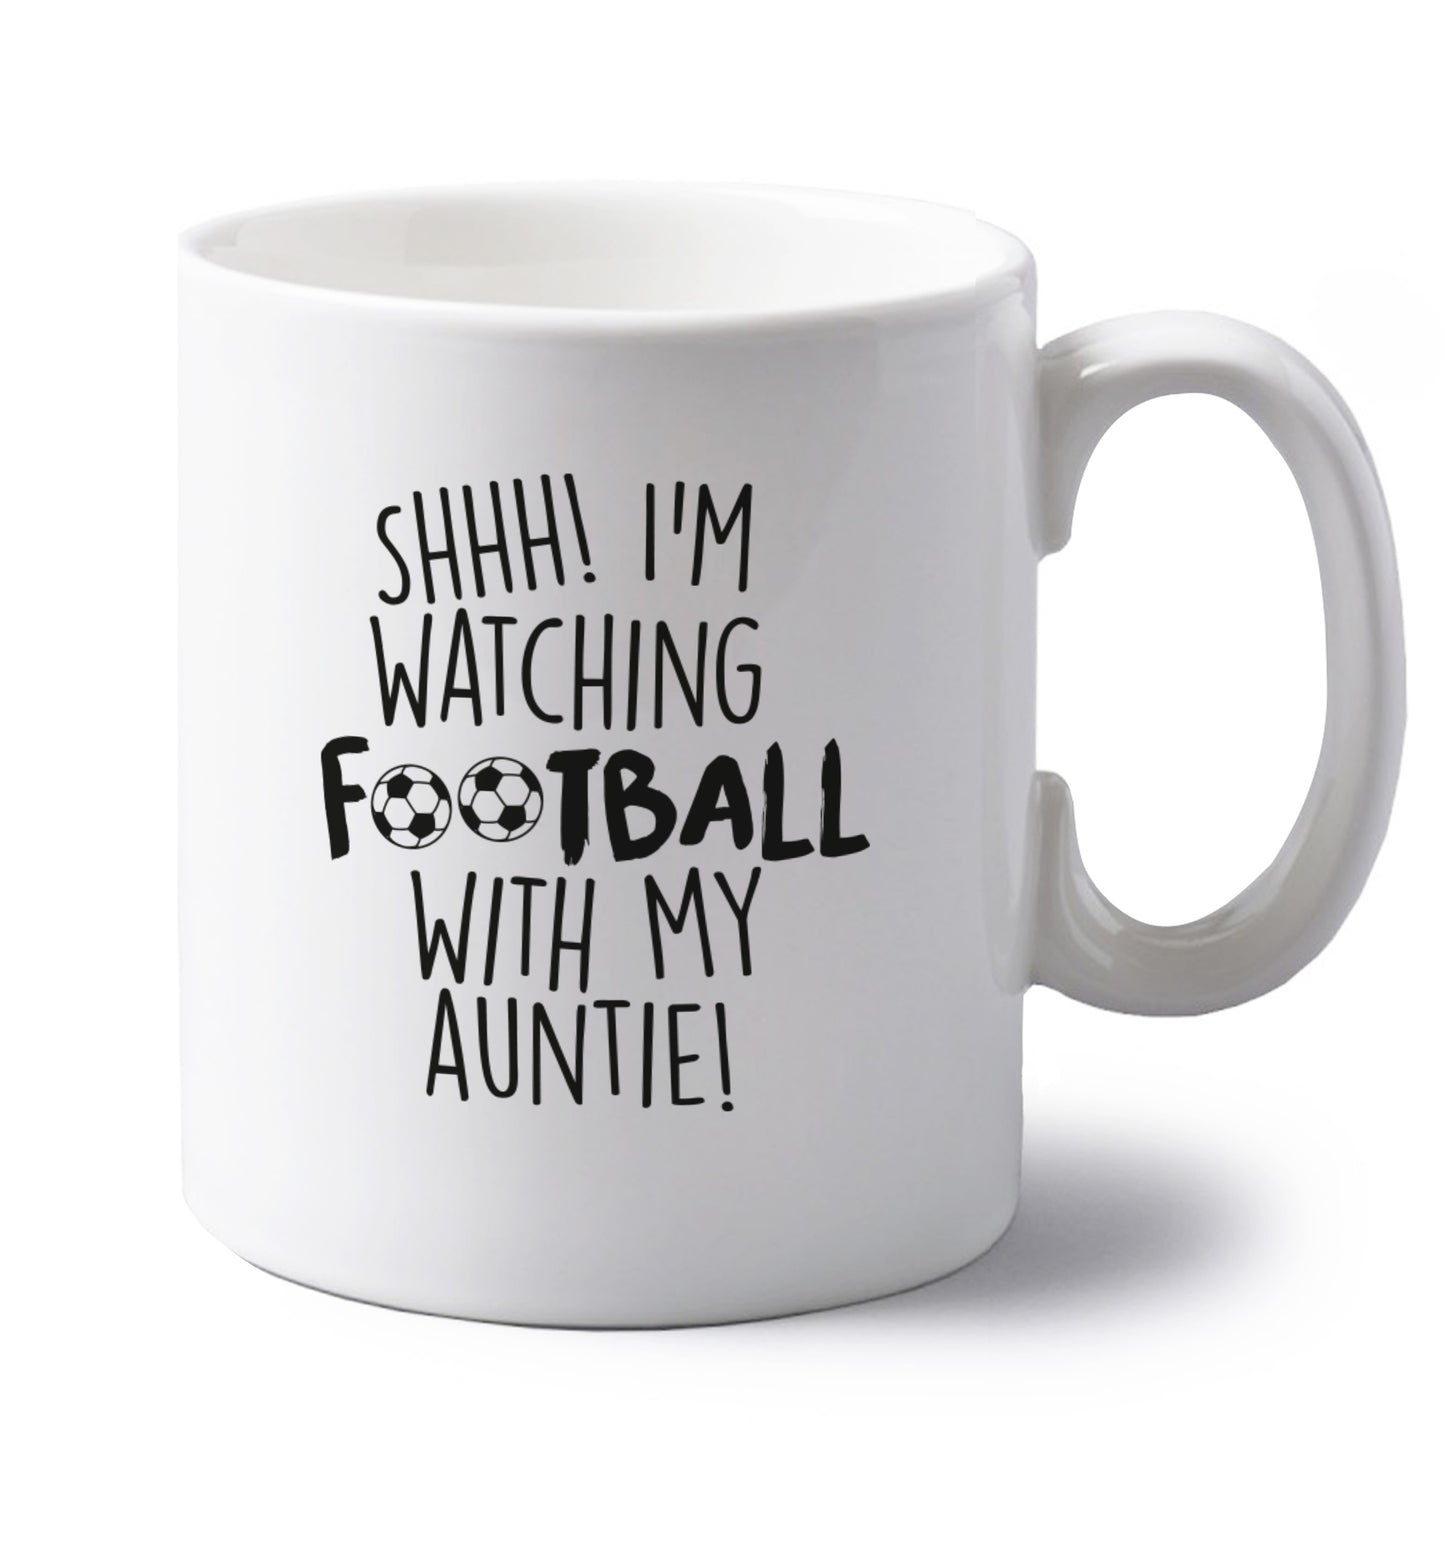 Shhh I'm watching football with my auntie left handed white ceramic mug 